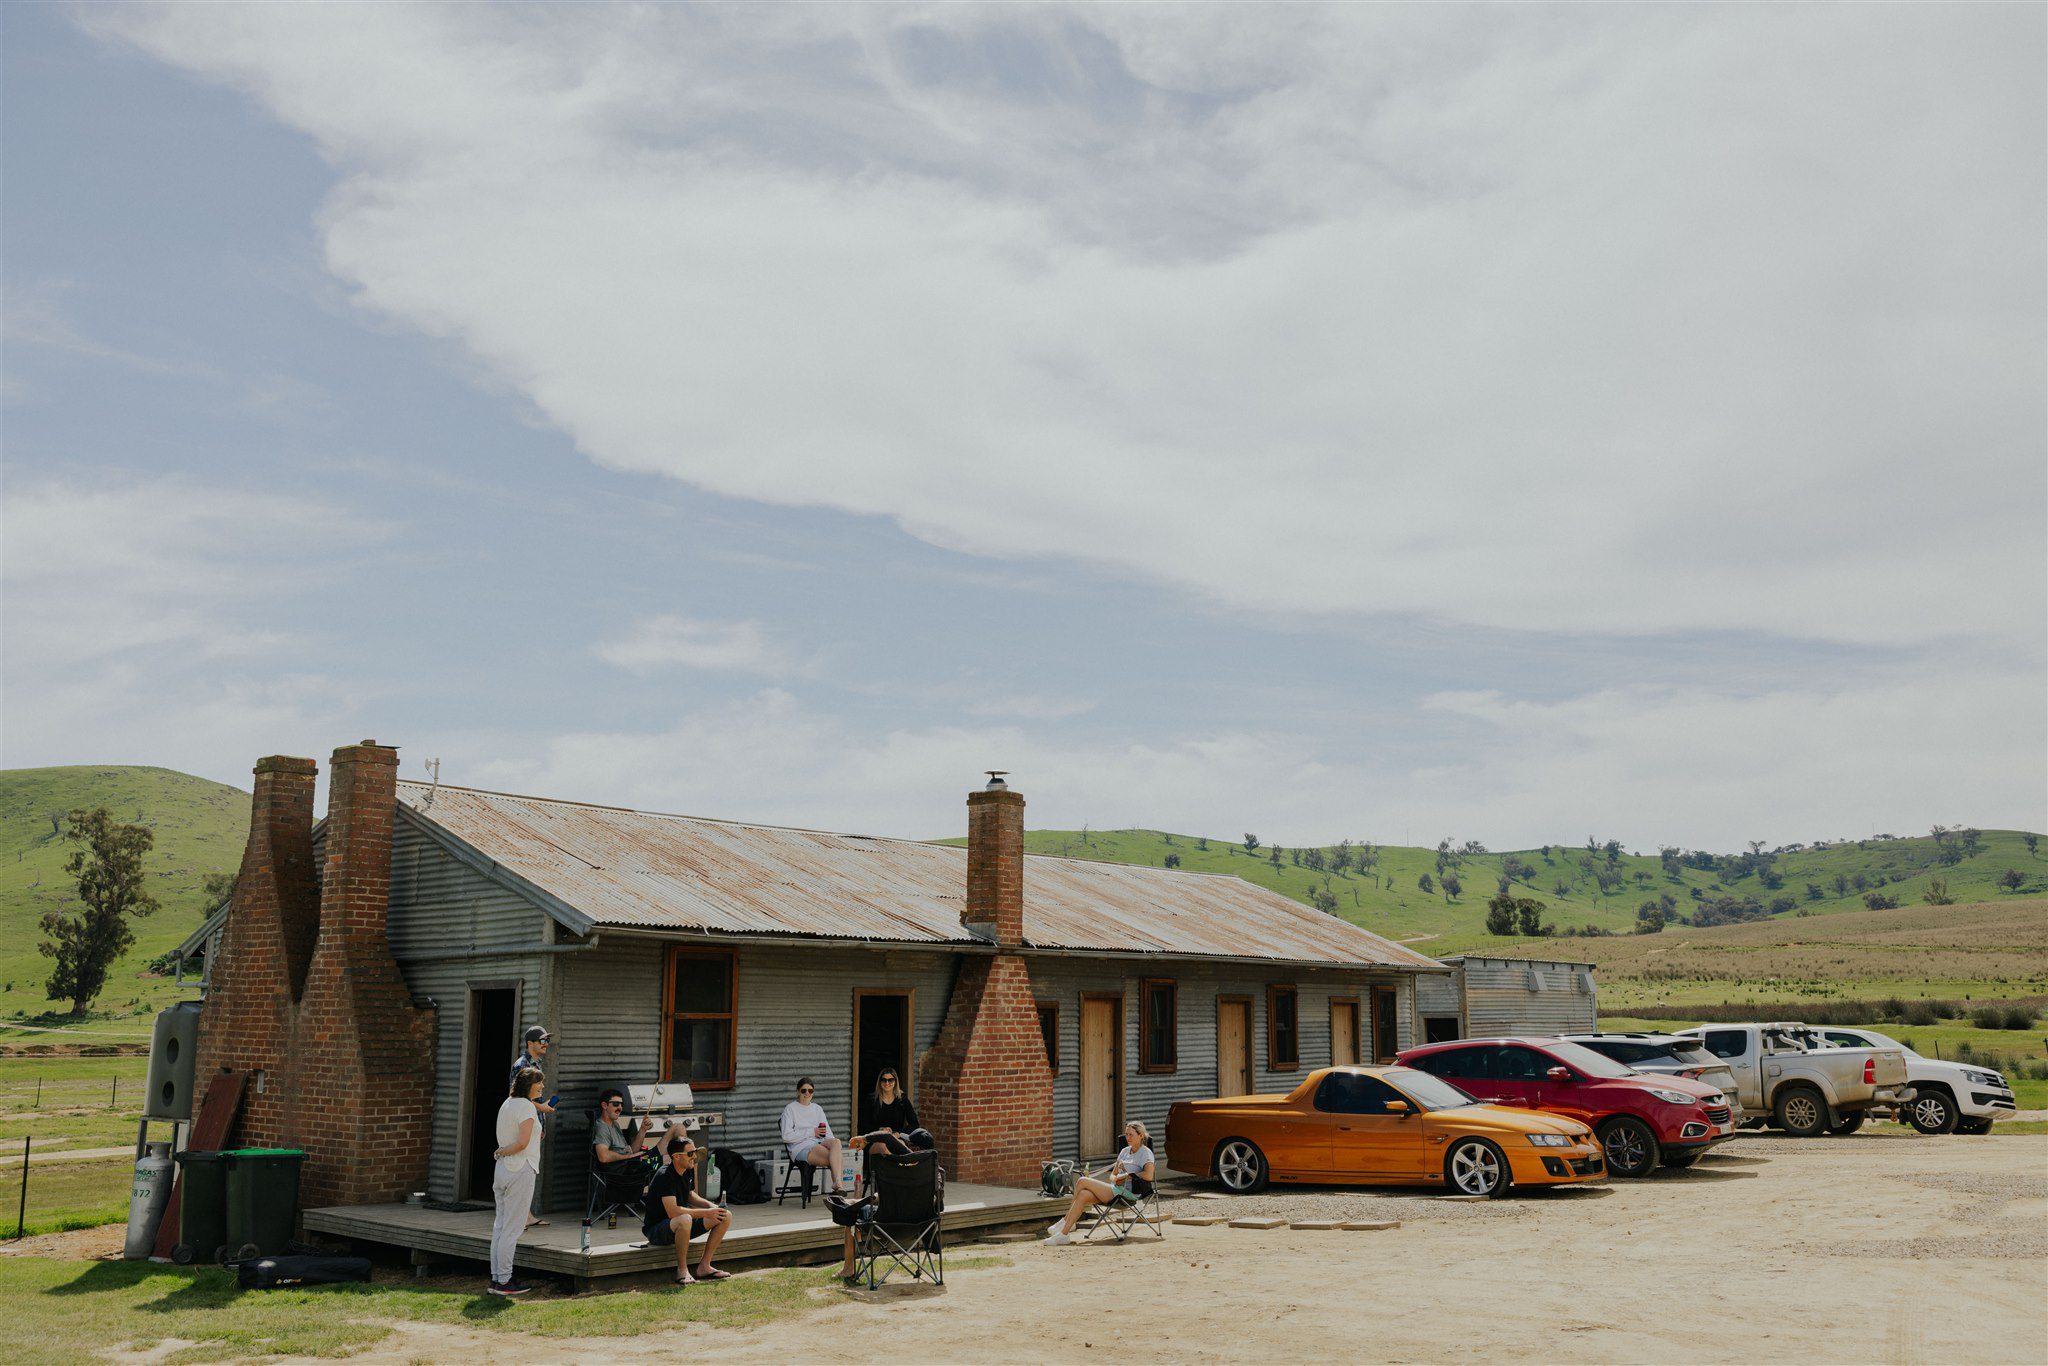 a country scene win hills in the background and a building with guests in the foreground